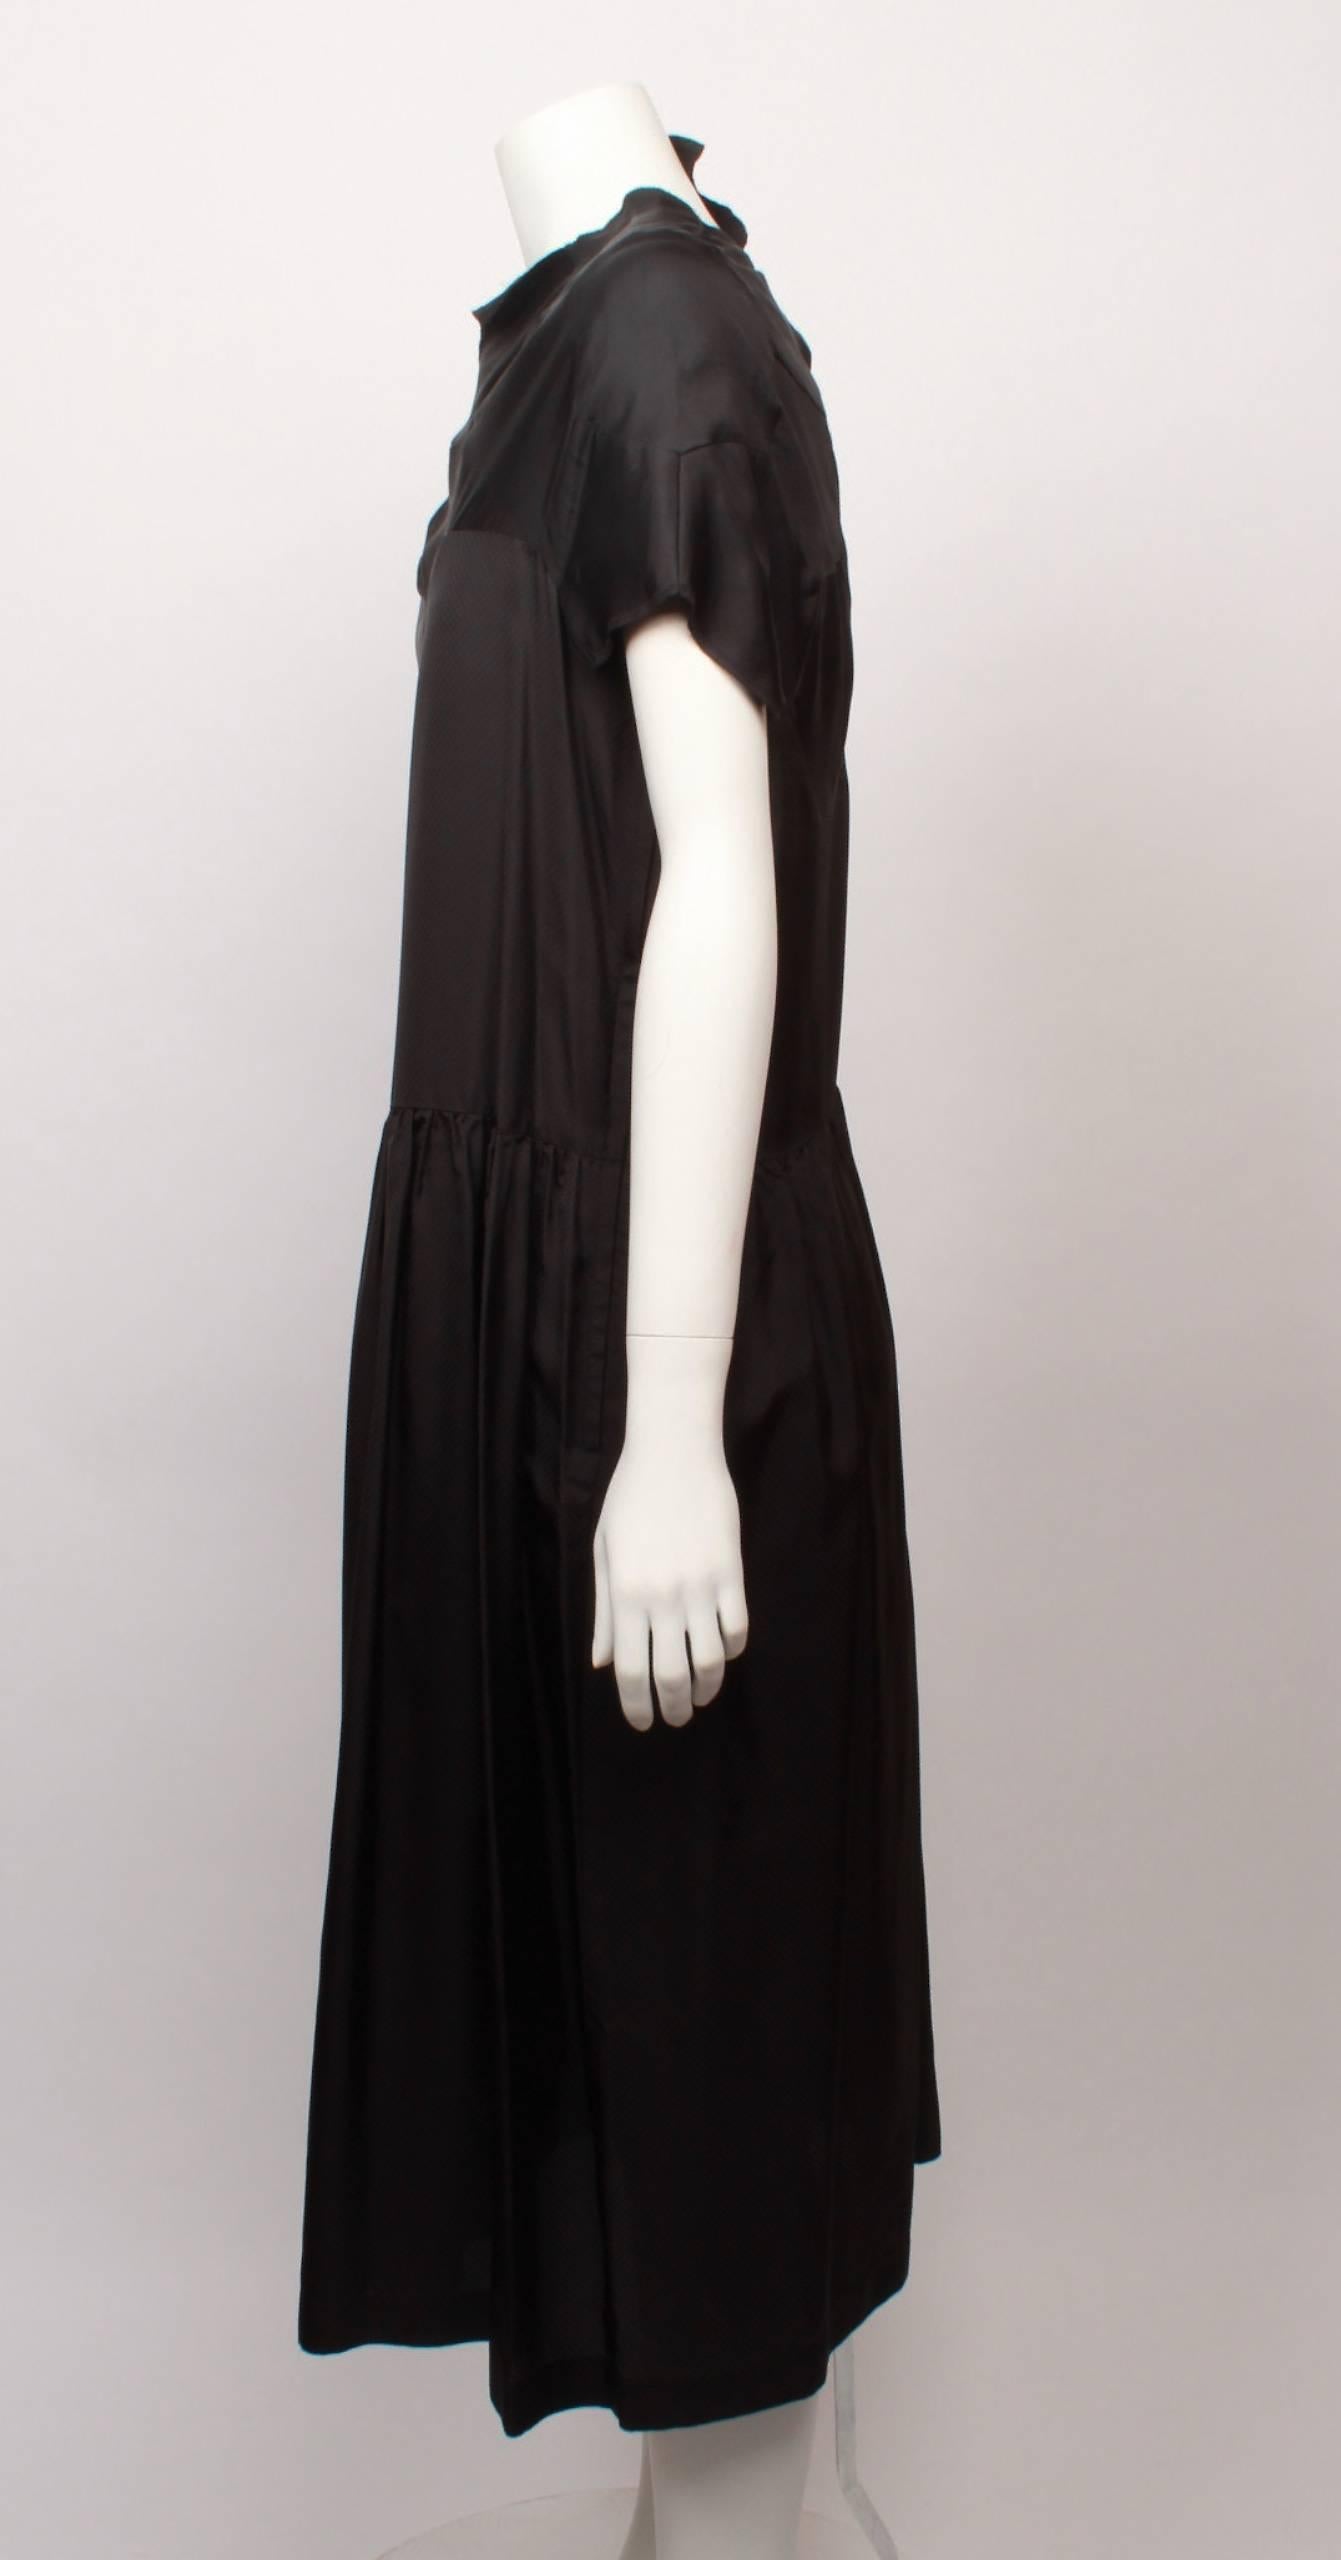 Comme des Garcons Geometric Panel Black Dress S In Good Condition For Sale In Melbourne, Victoria